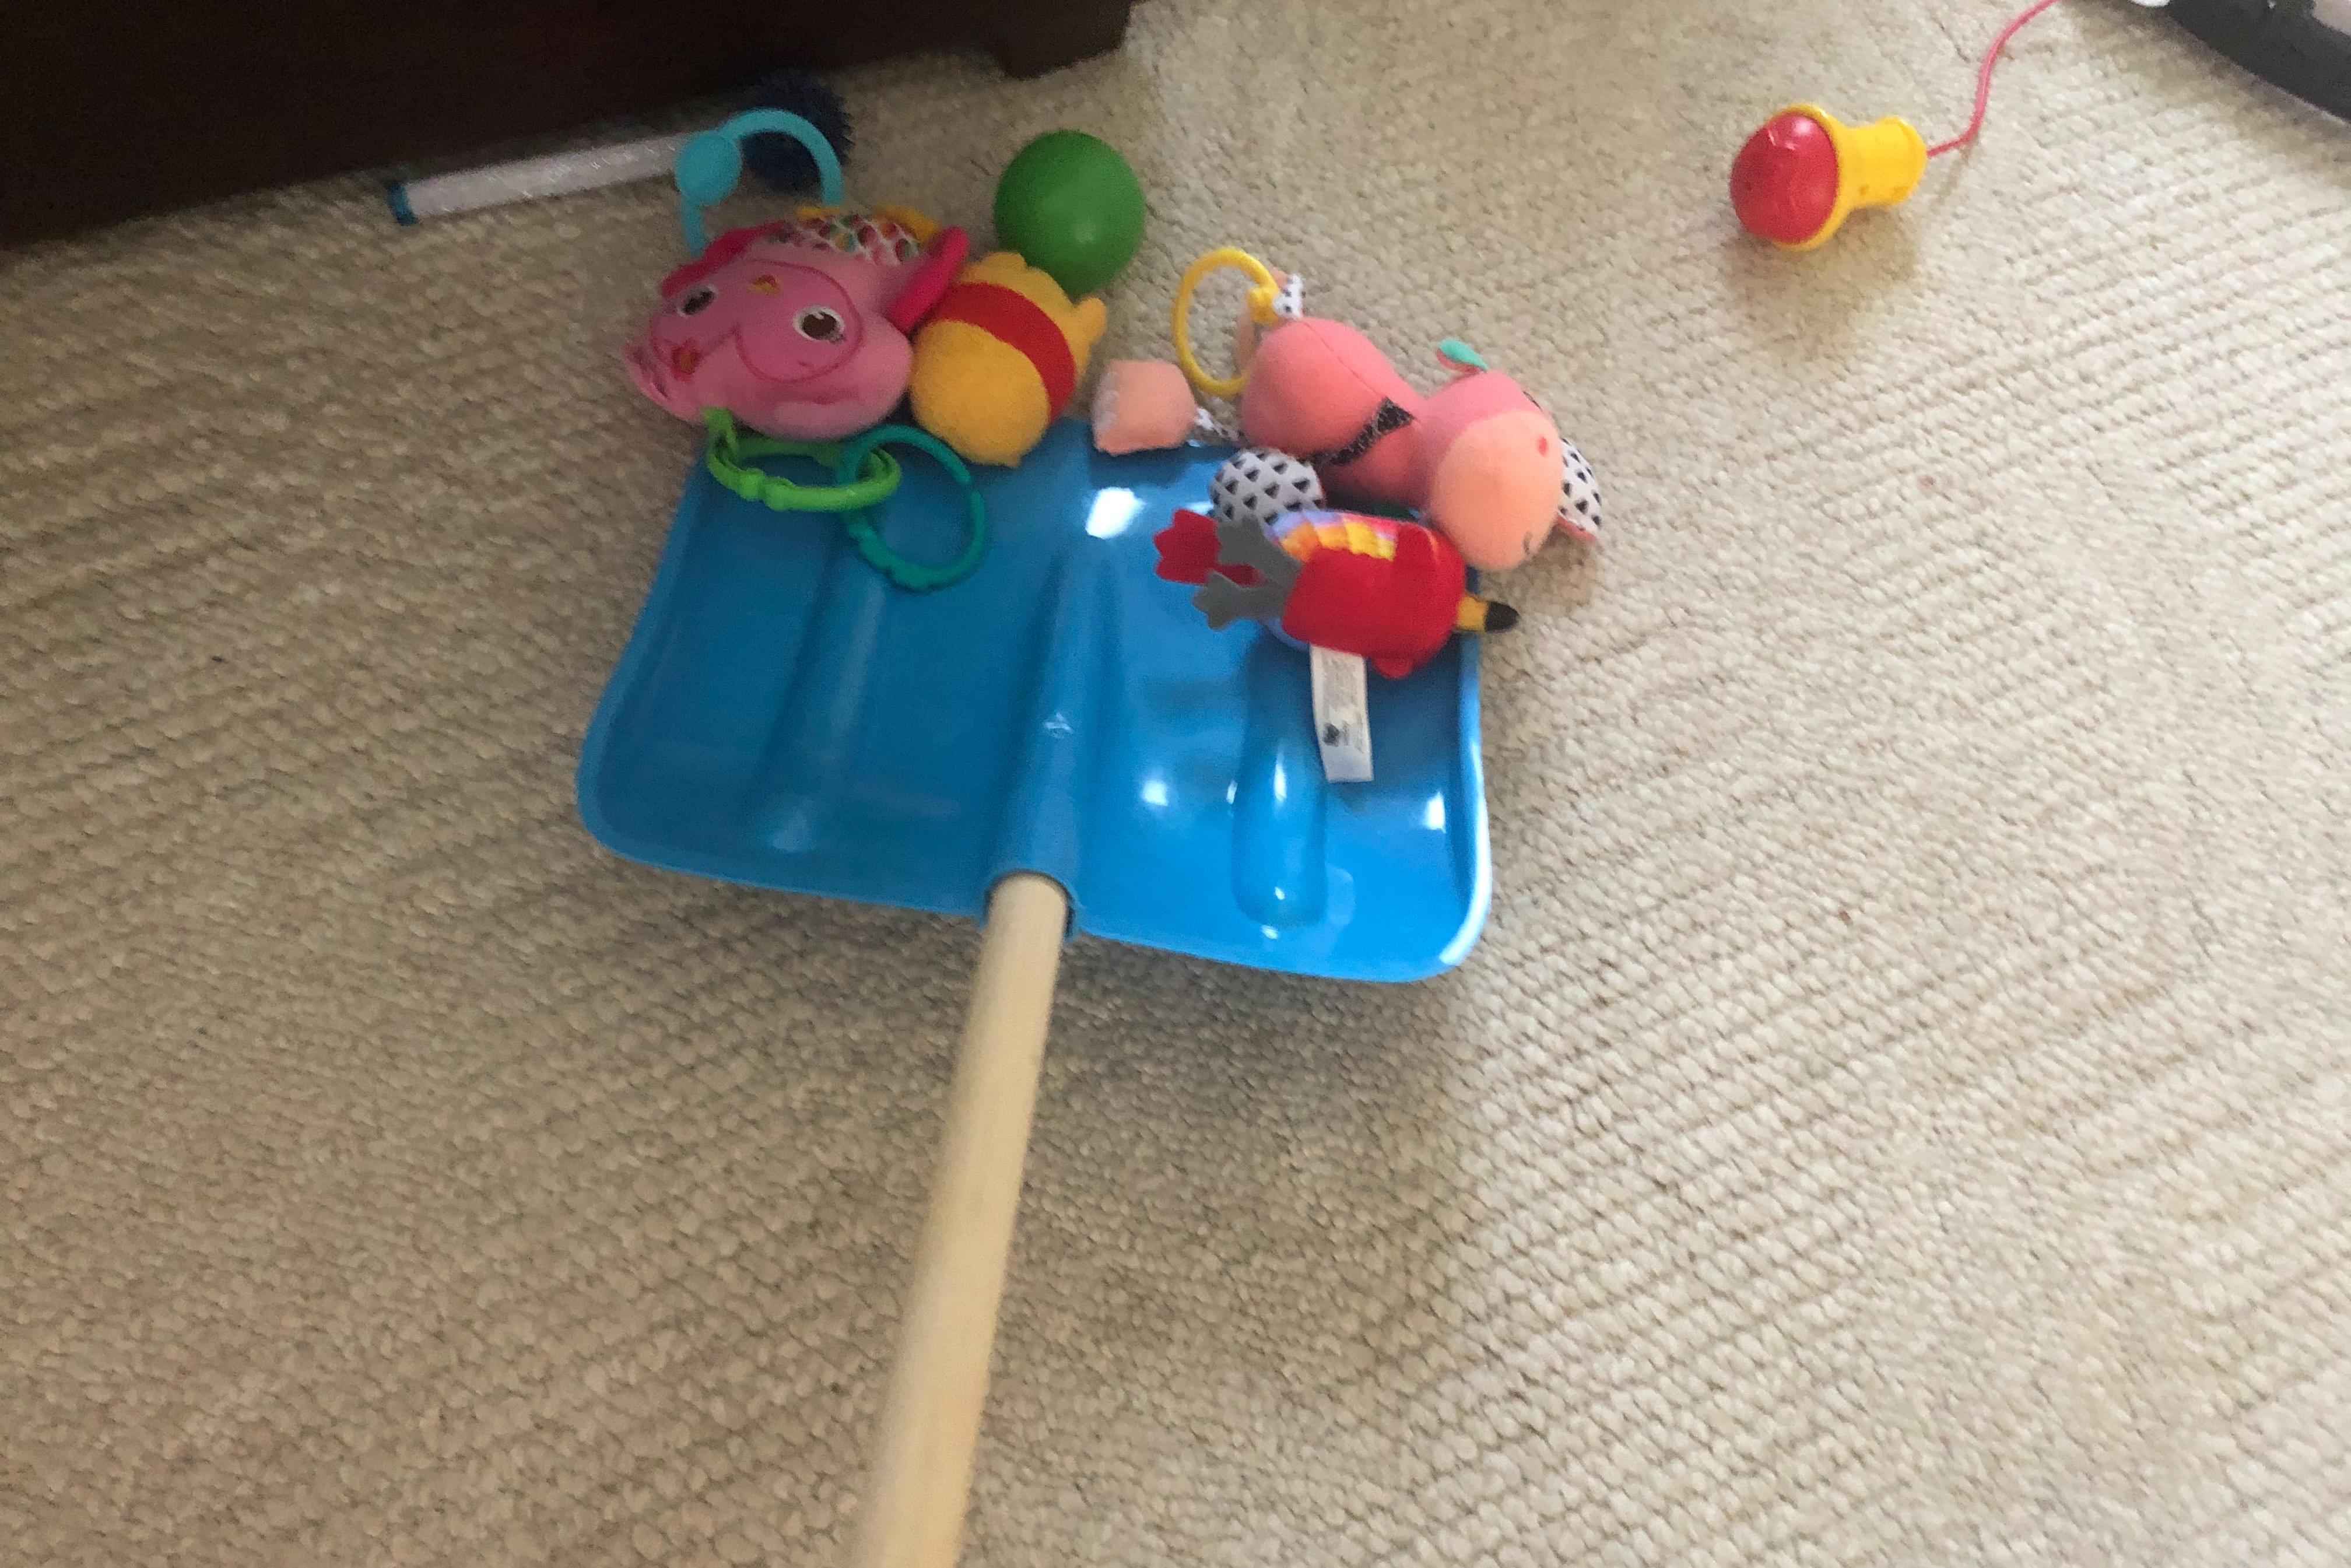 Toy Snow Shovel = Fast Cleaning